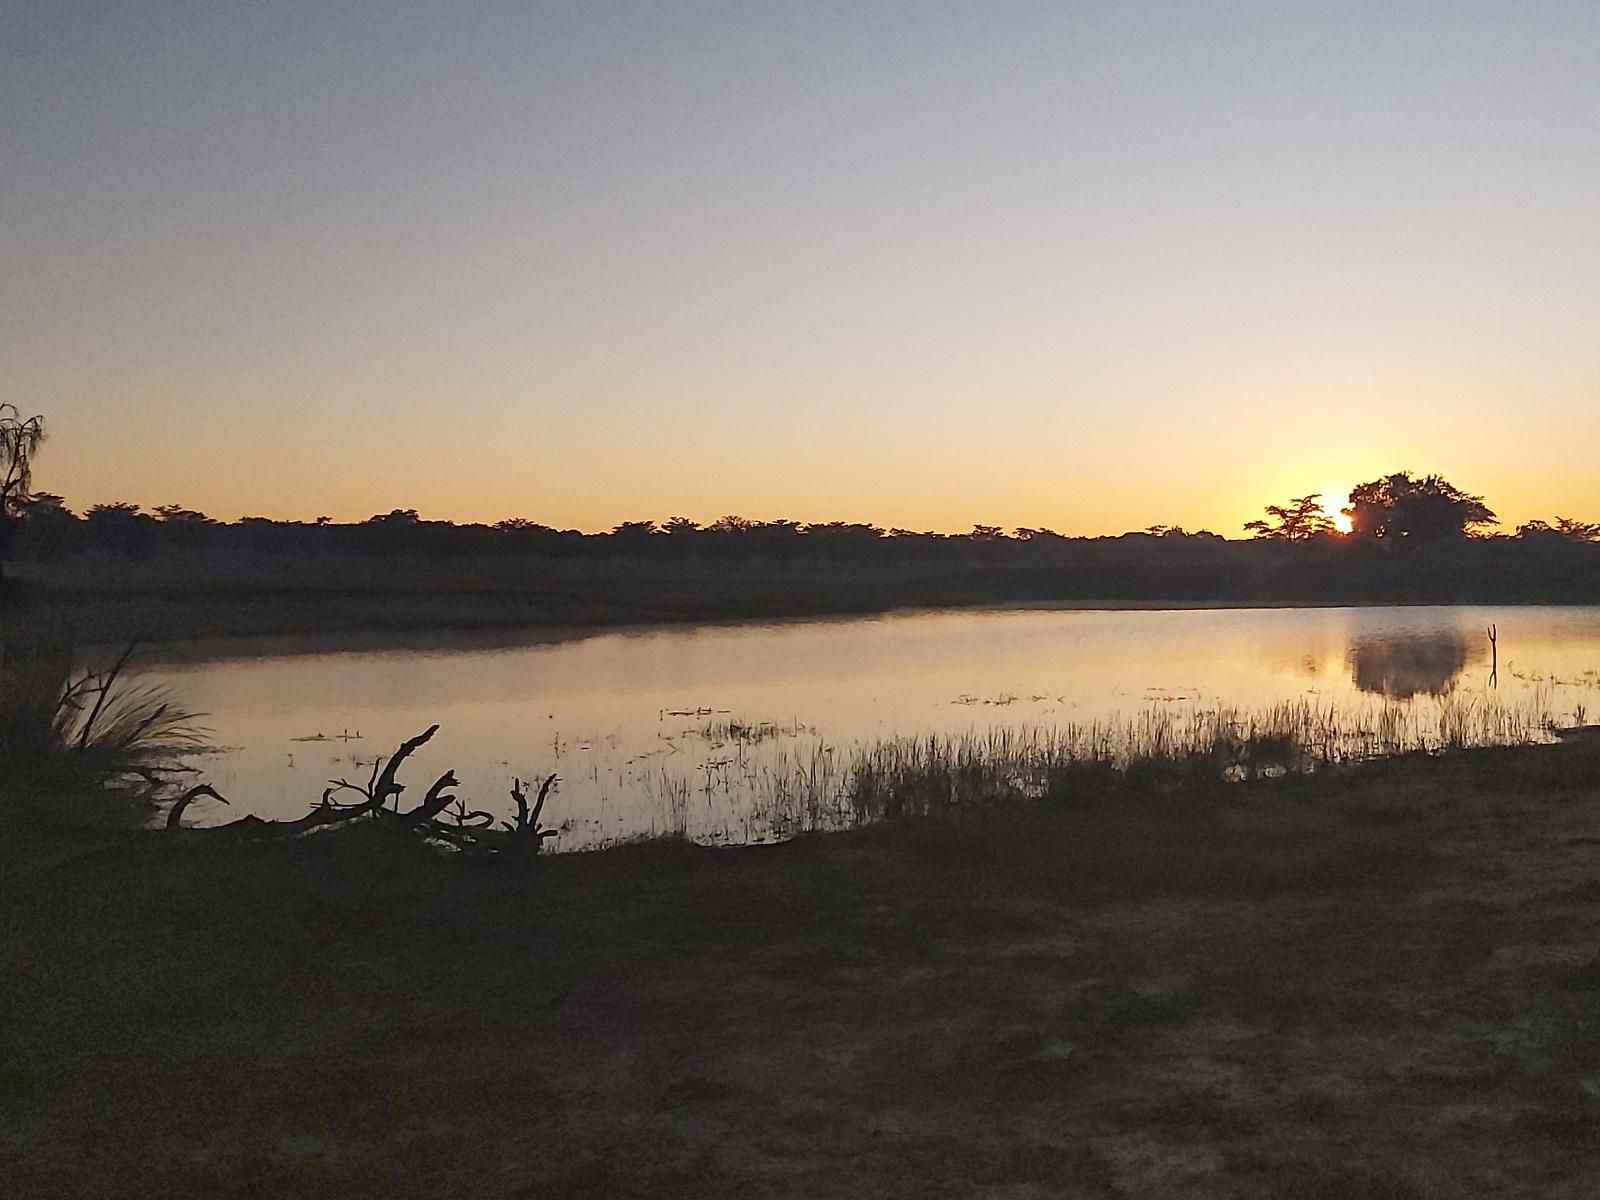 Izintaba Private Game Reserve Vaalwater Limpopo Province South Africa Lake, Nature, Waters, Sky, Sunset